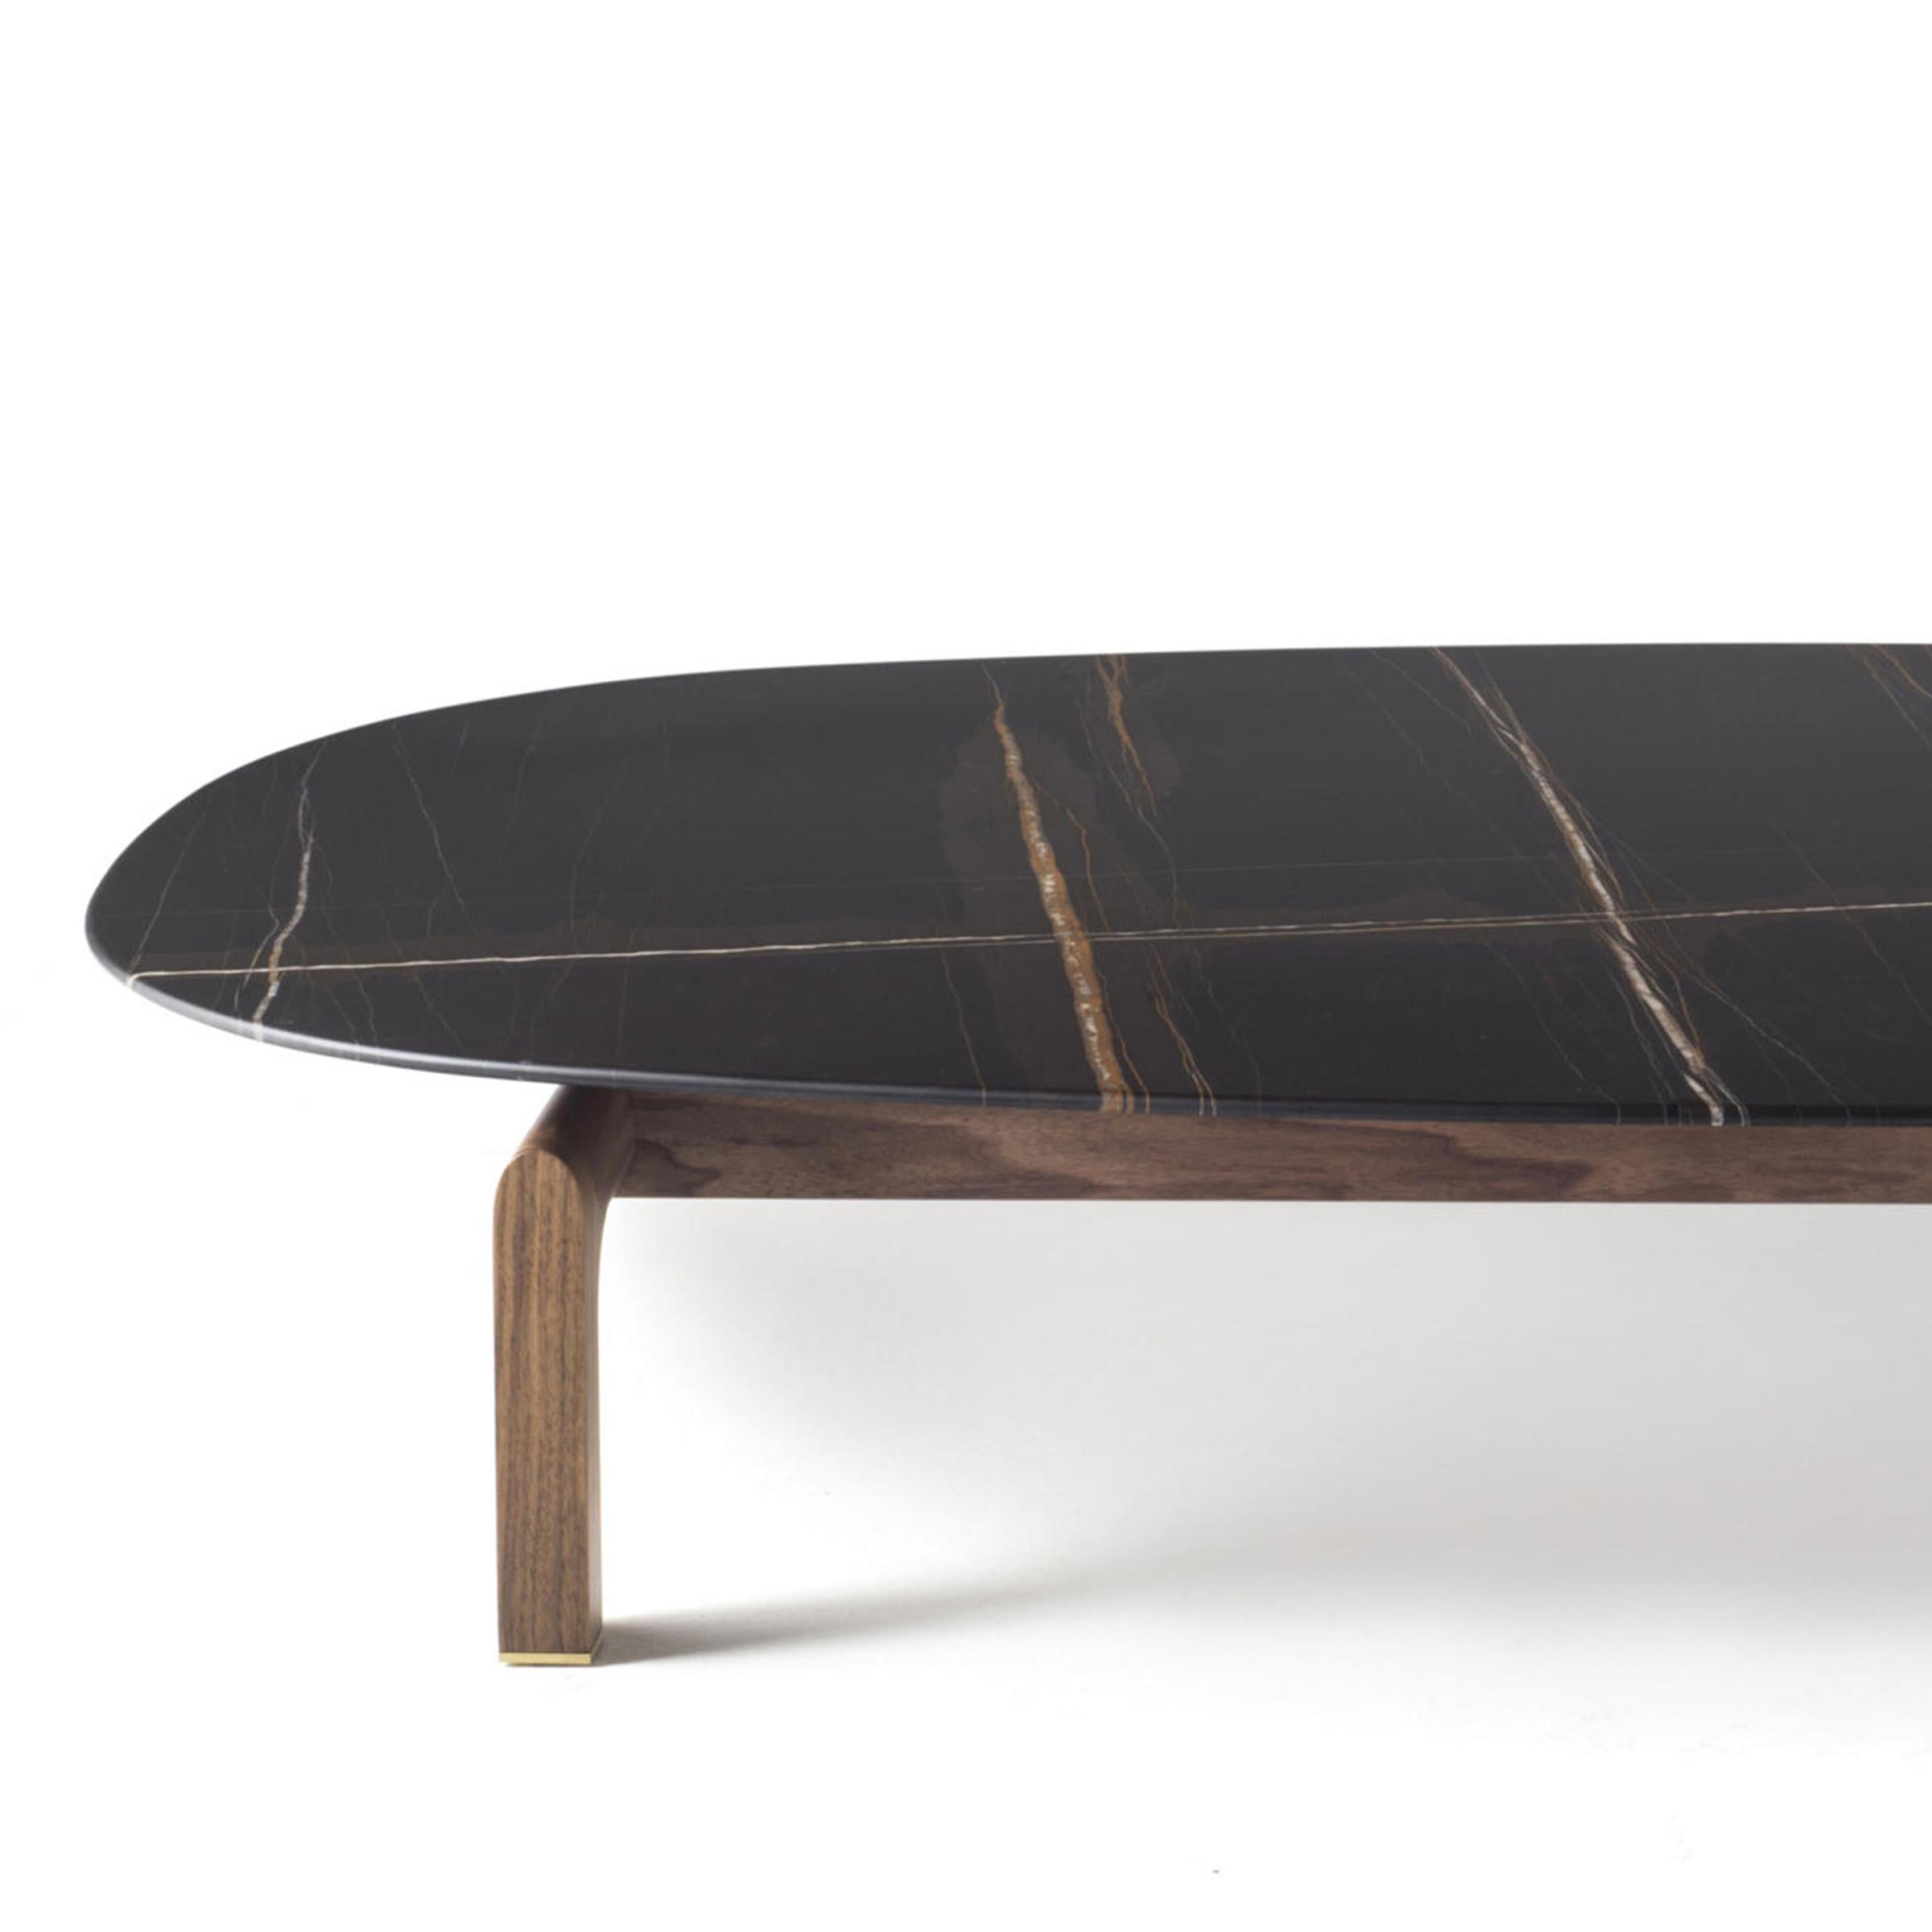 Coffee table dark night with black Sahara marble
high quality and with handcrafted solid walnut
wood base.
Also available with white Calacatta marble top
or emperador marble top, on request.
Also available with rectangular top.